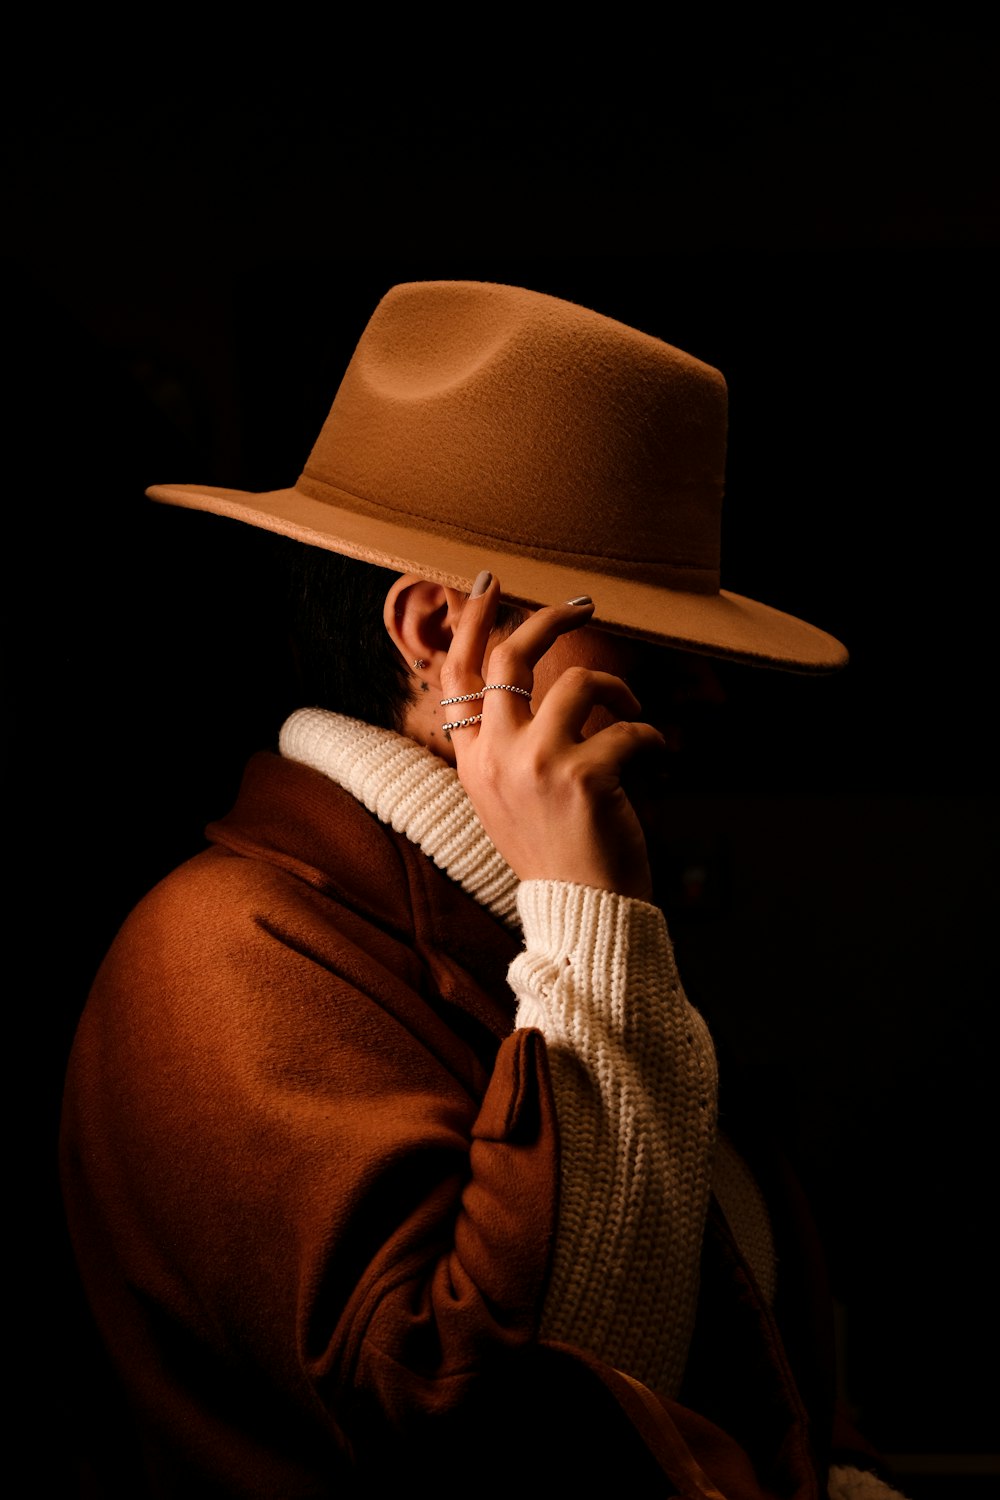 a person wearing a brown hat and coat